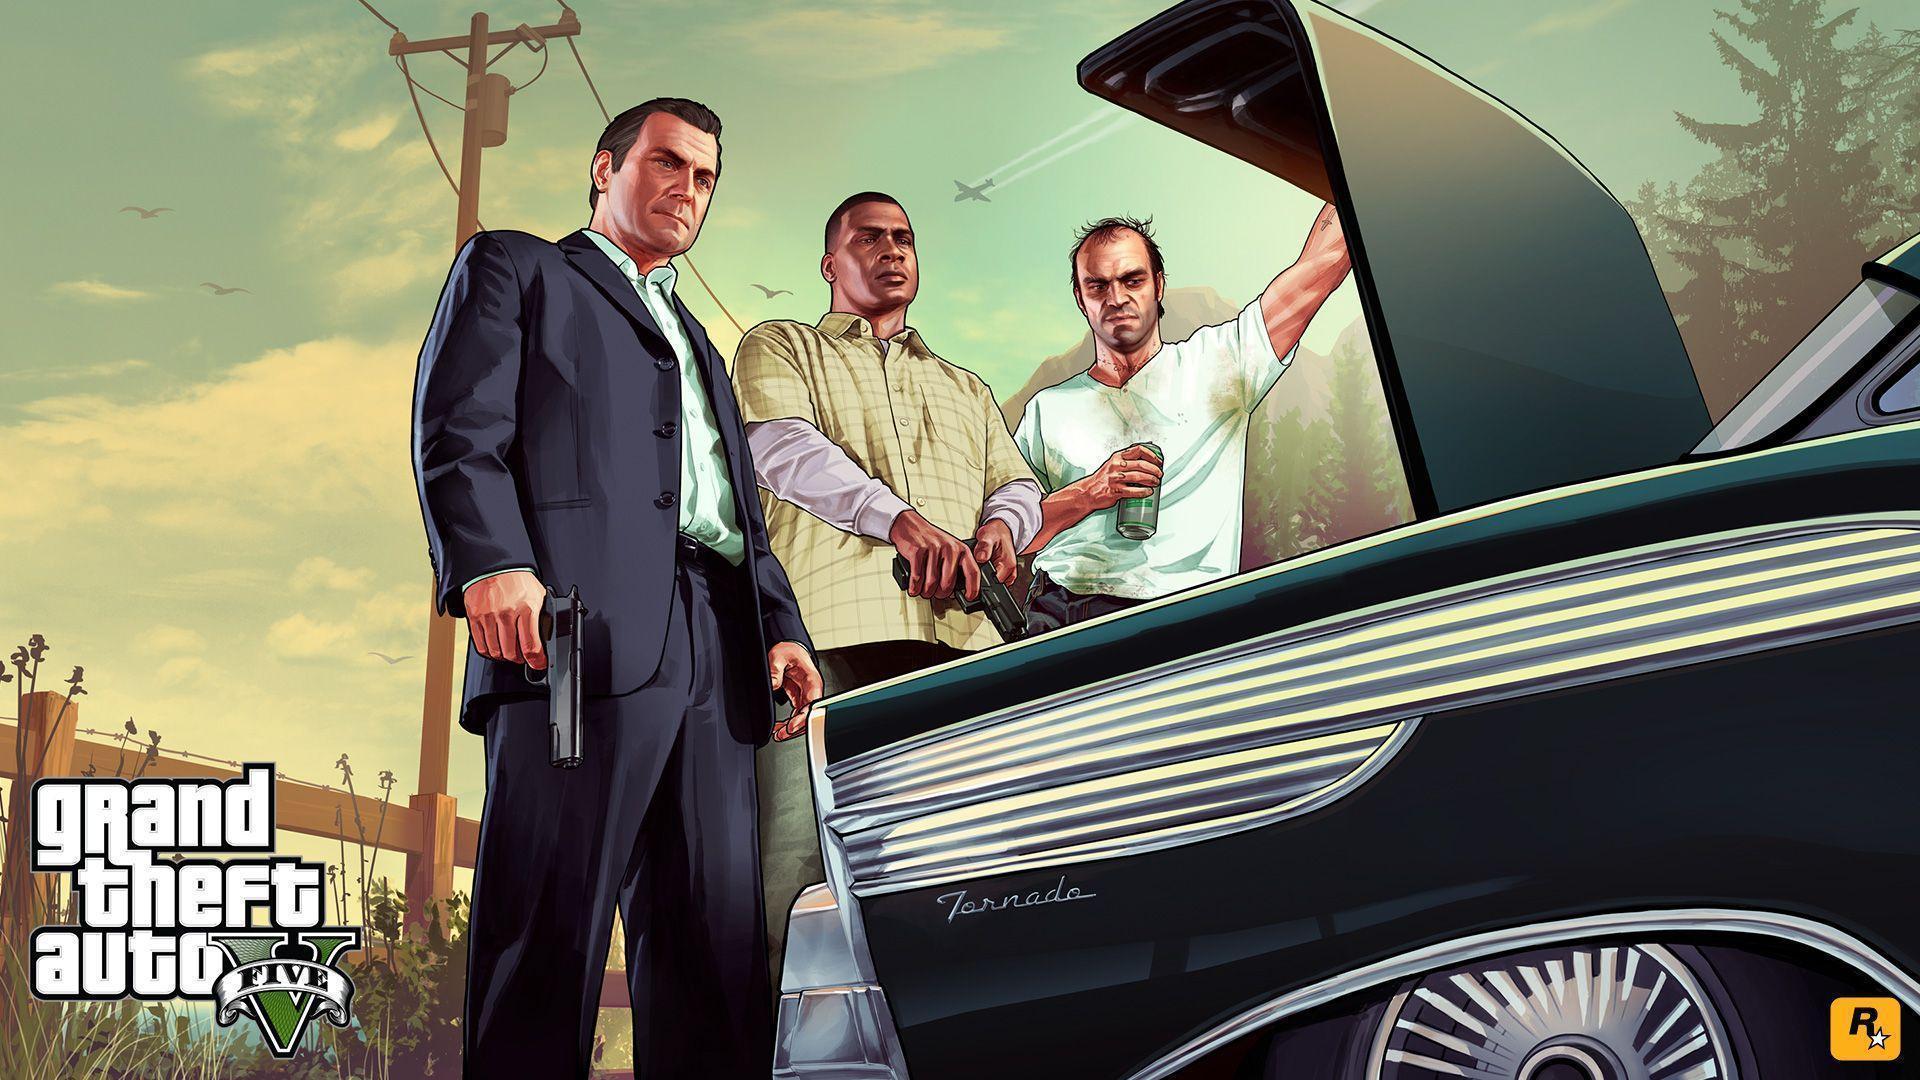 Awesome Grand Theft Auto V Wallpaper. Full HD Picture